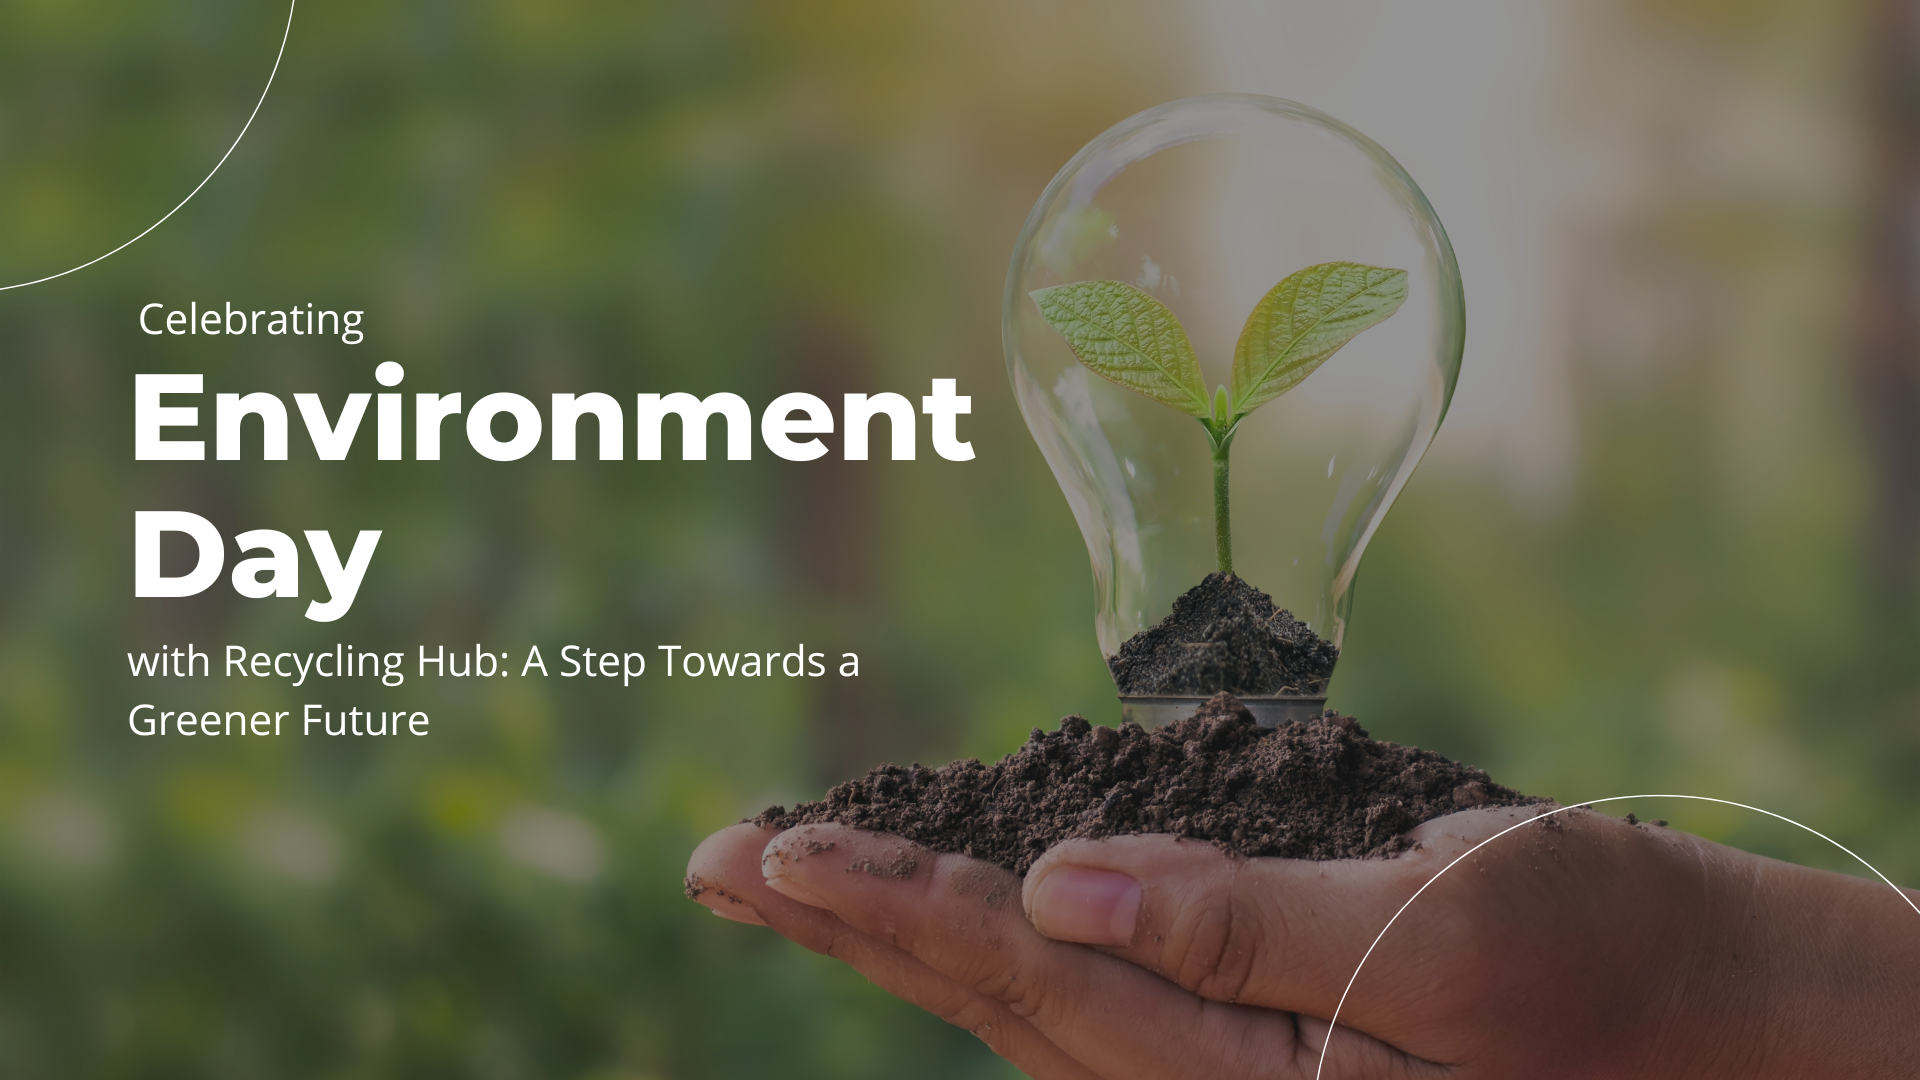 Celebrating World Environment Day with Recycling Hub: A Step Towards a Greener Future